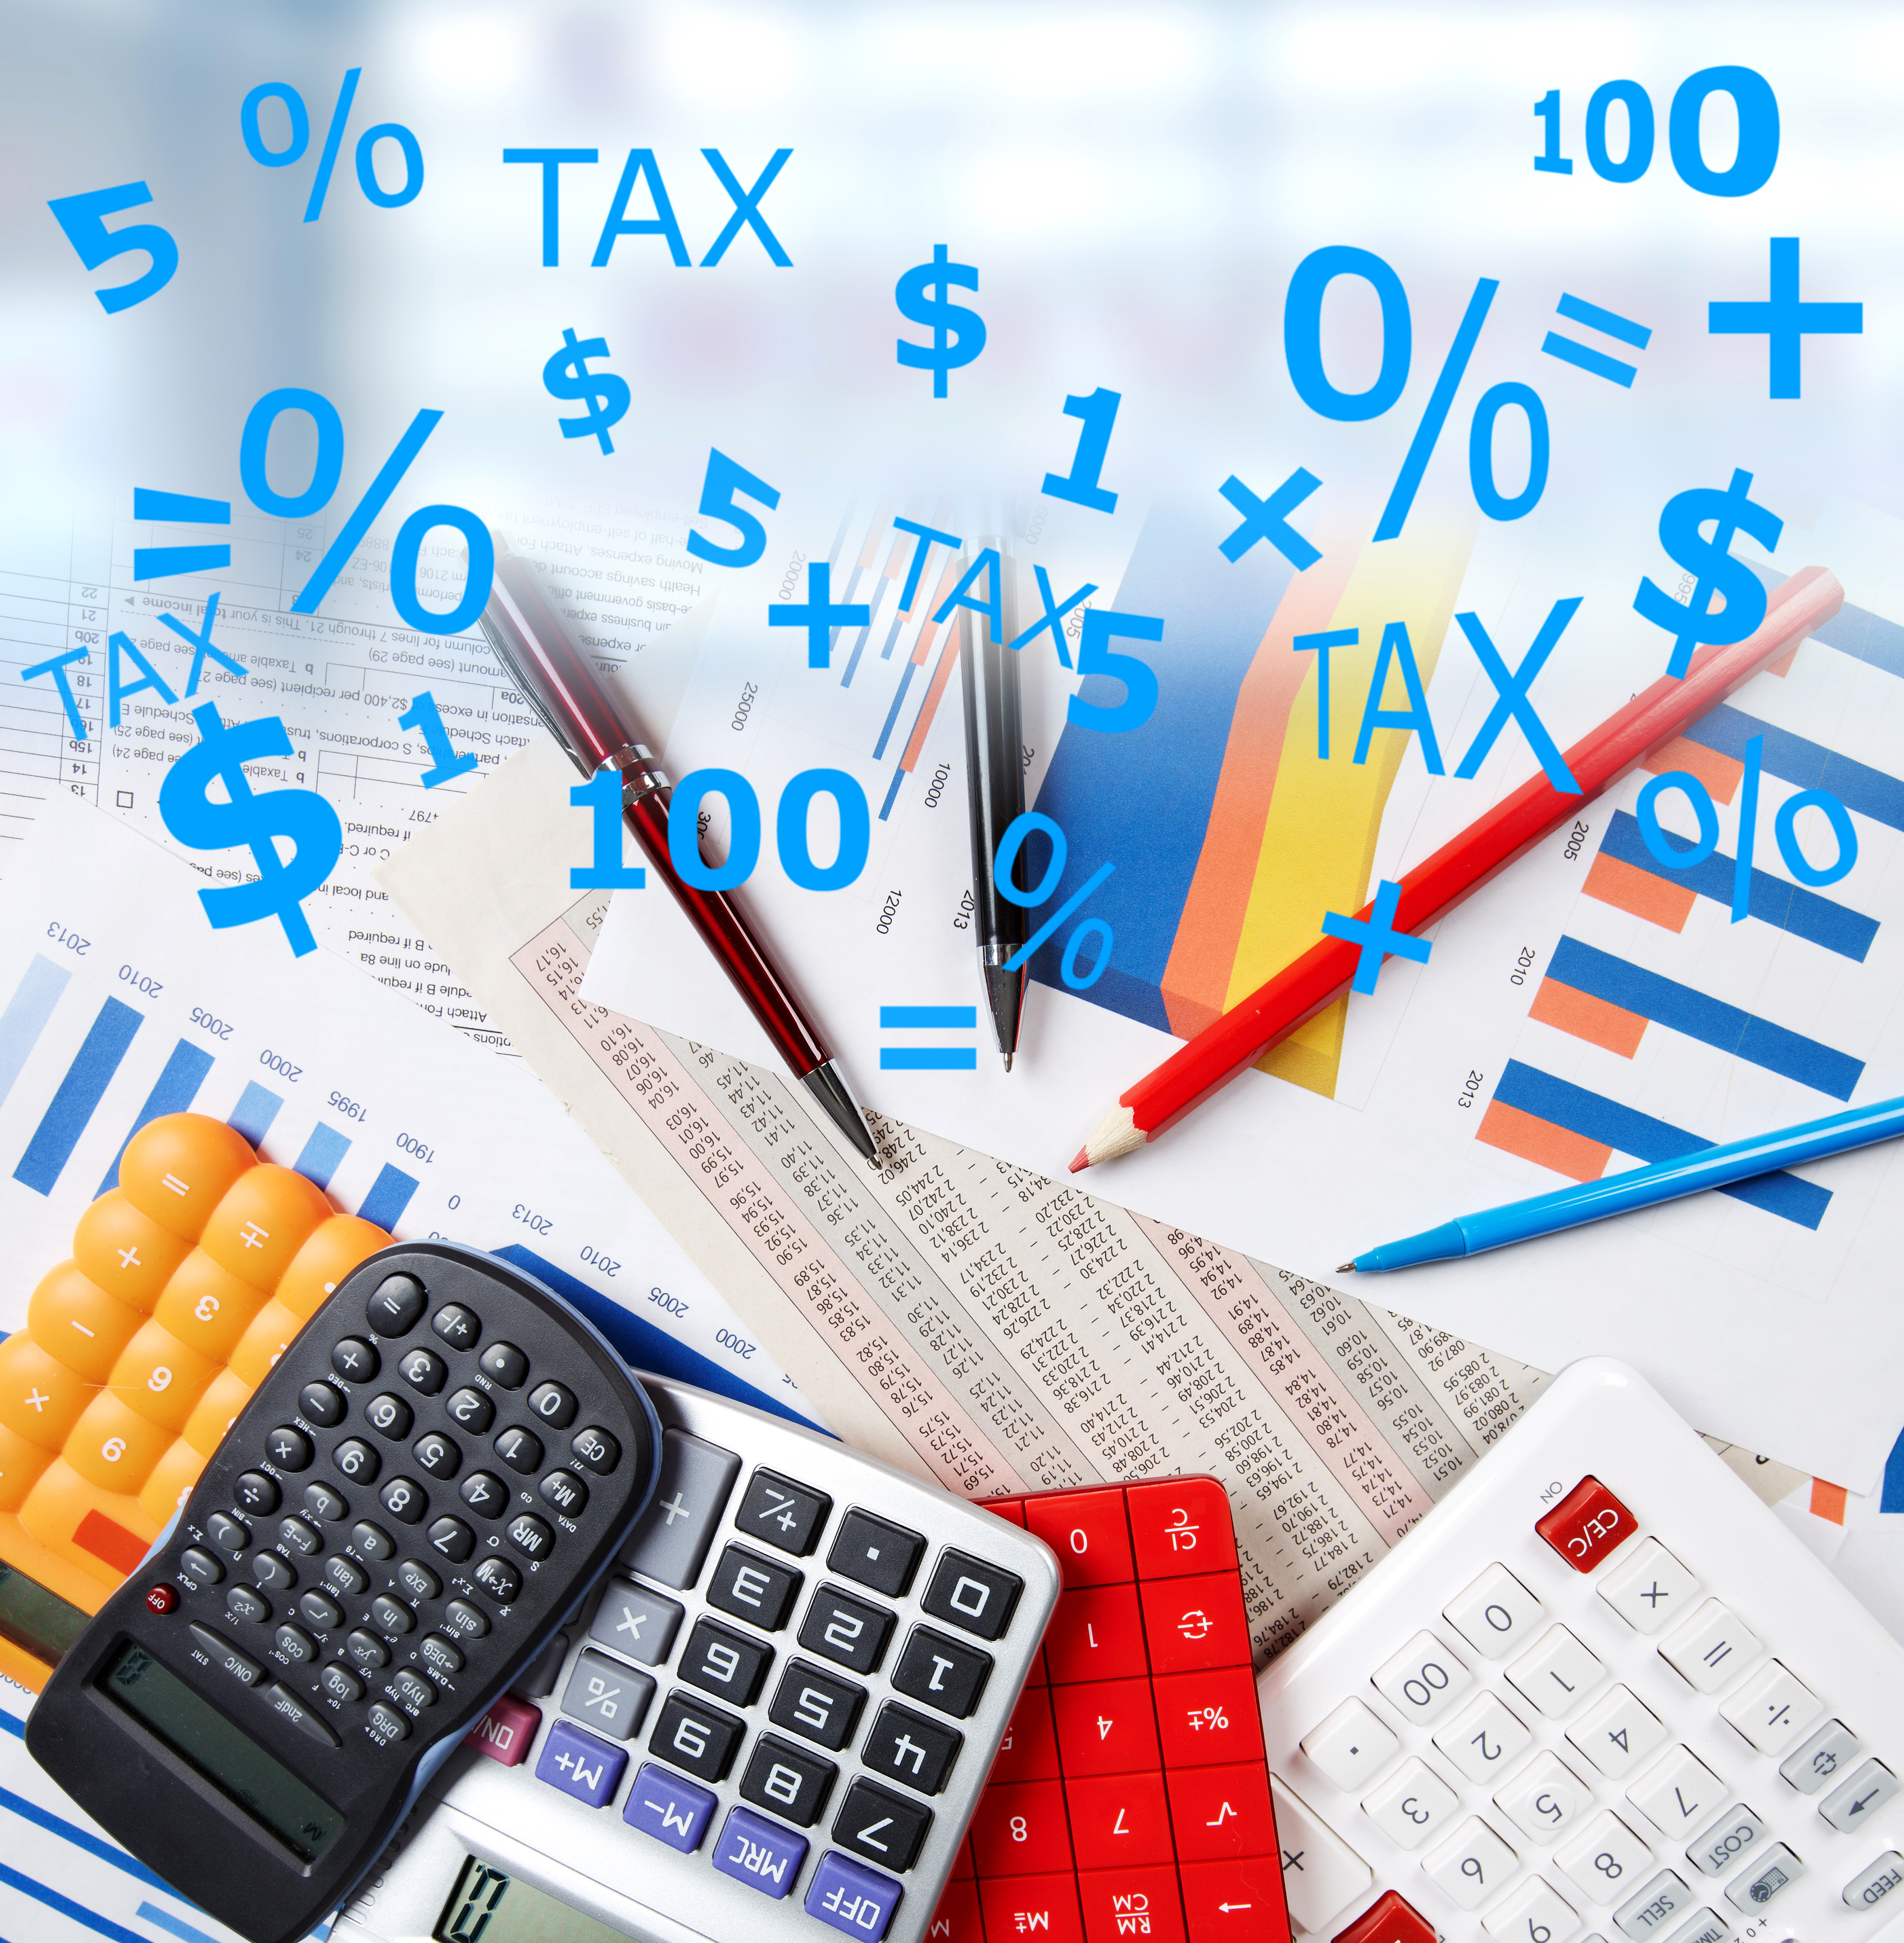 Arranging Your Finances to Reduce Your Taxes